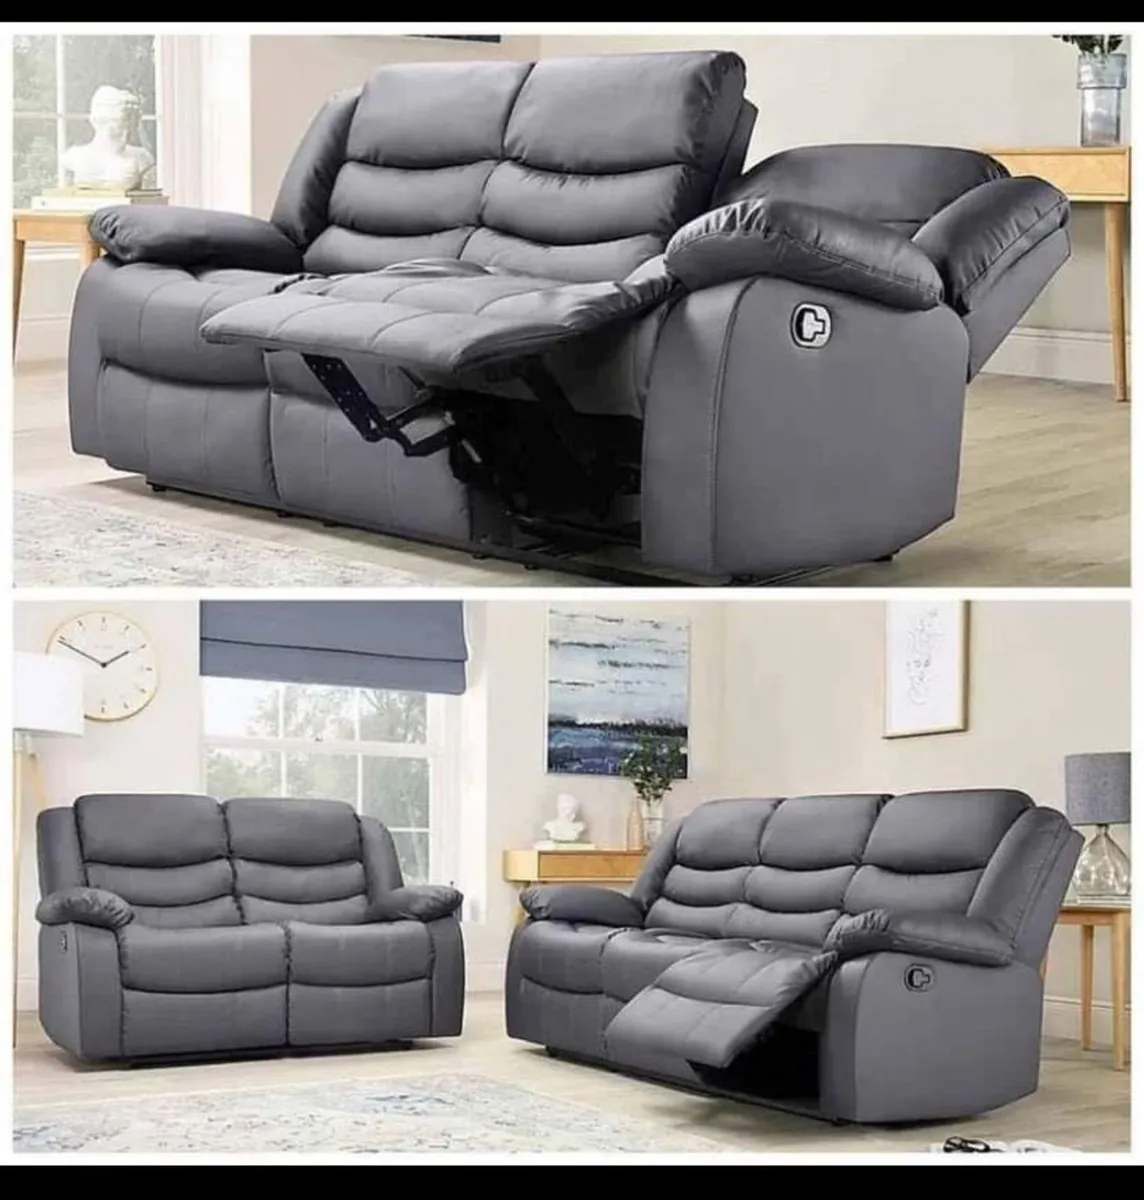 New 3+2 seater sofa available - Image 1